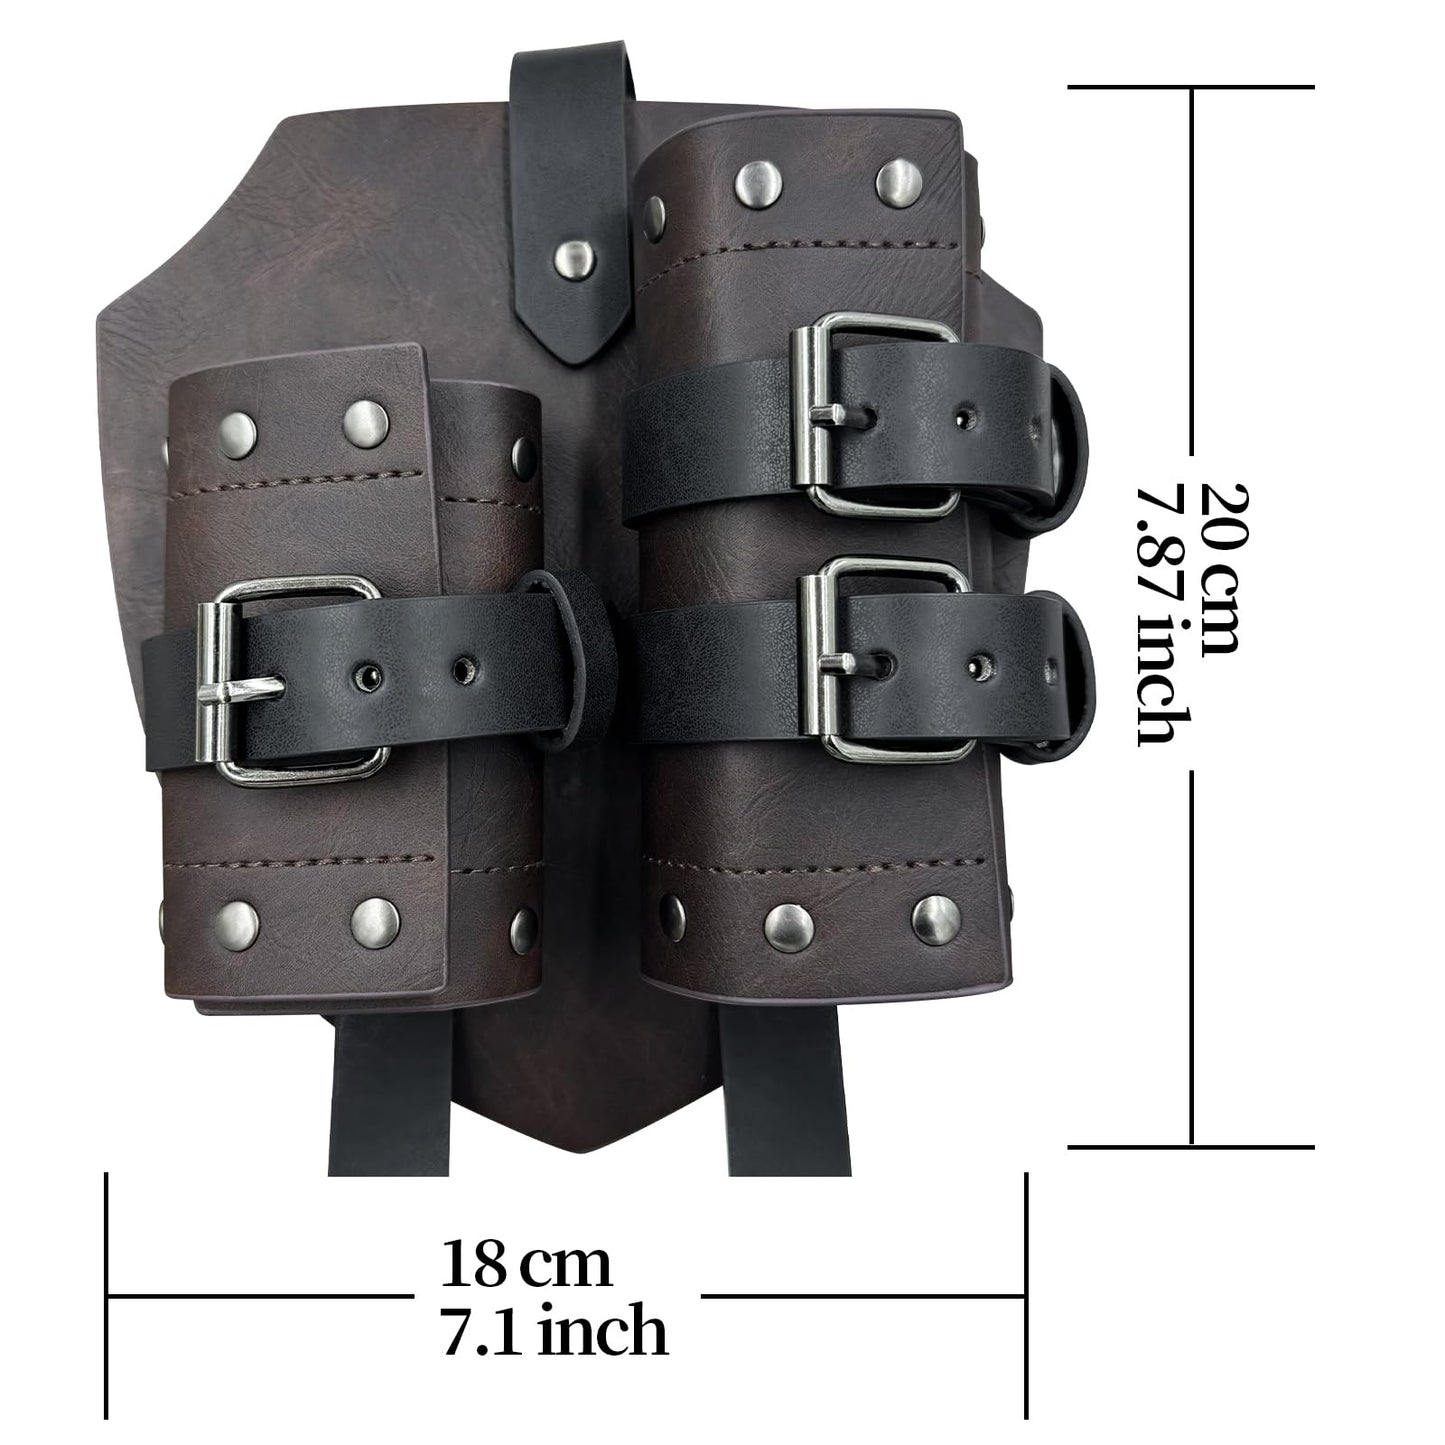 HiiFeuer Medieval Faux Leather Double Back Sword Frog, Mercenary Adjustable Sword Holster, Middle Ages Back Sword Holster Brown a